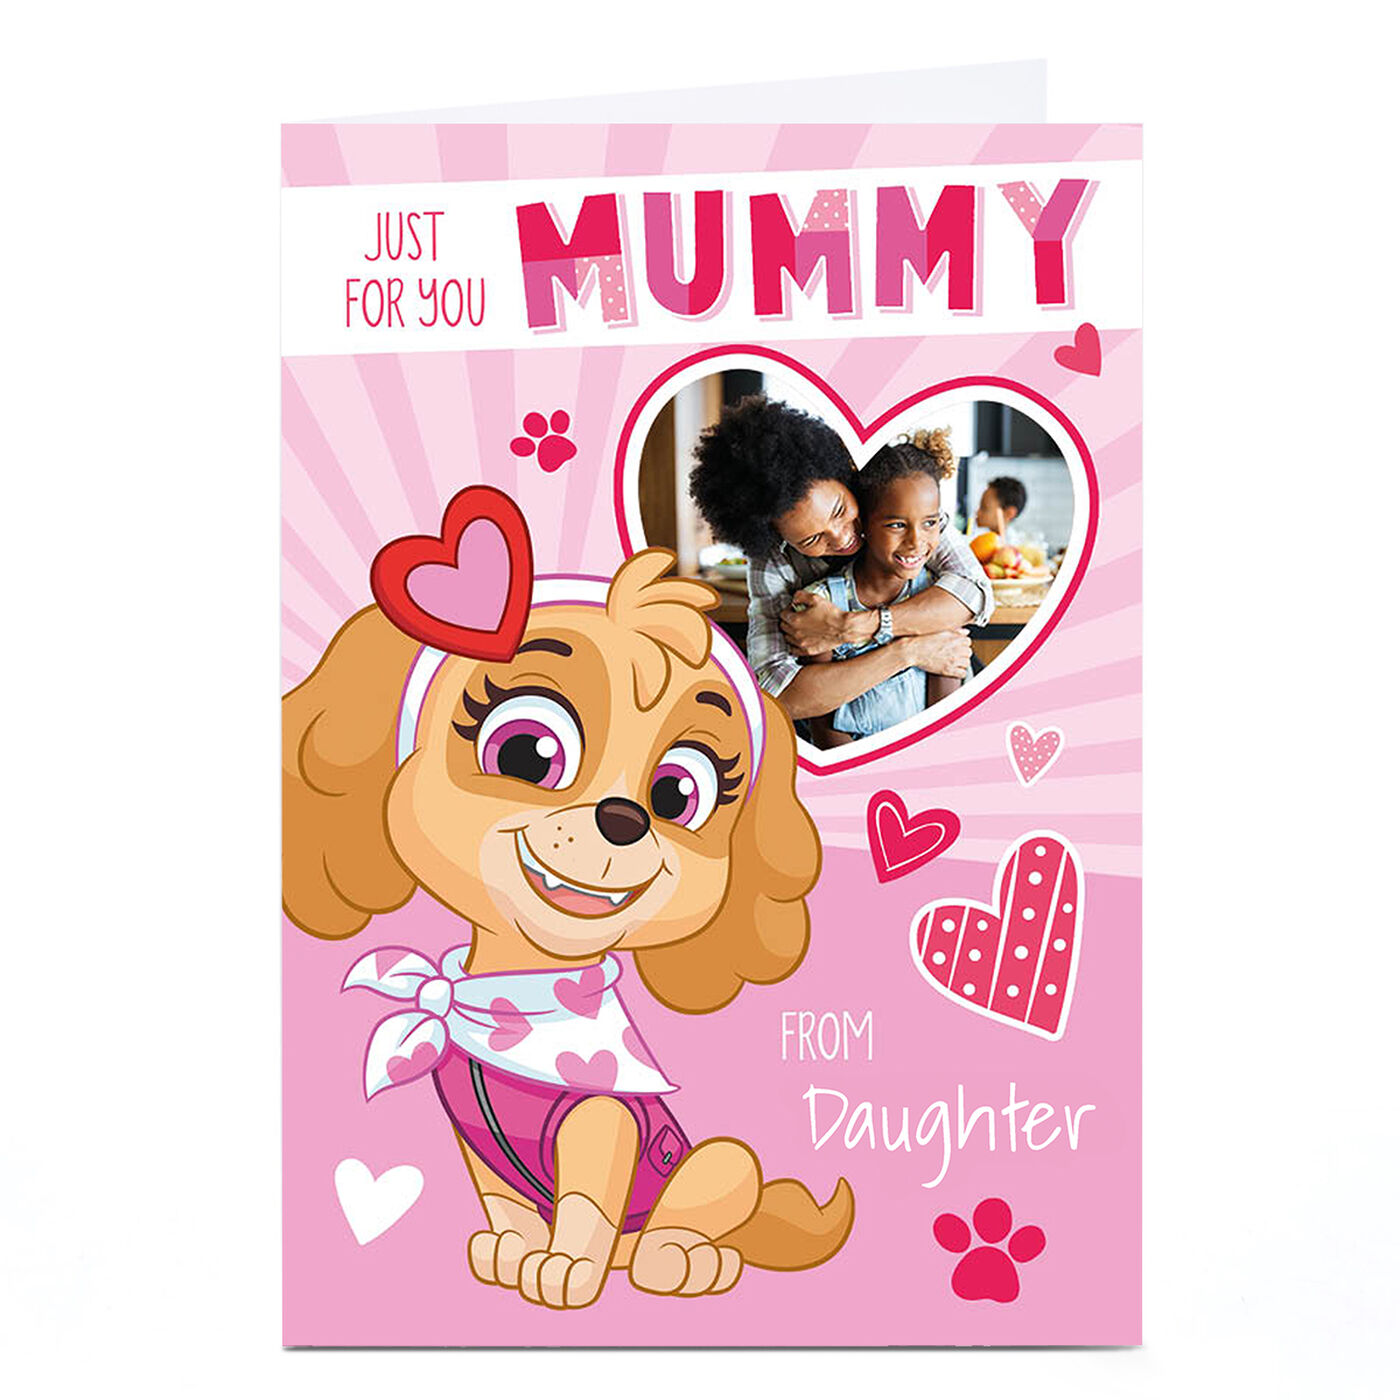 buy-photo-paw-patrol-valentine-s-day-card-mummy-from-daughter-for-gbp